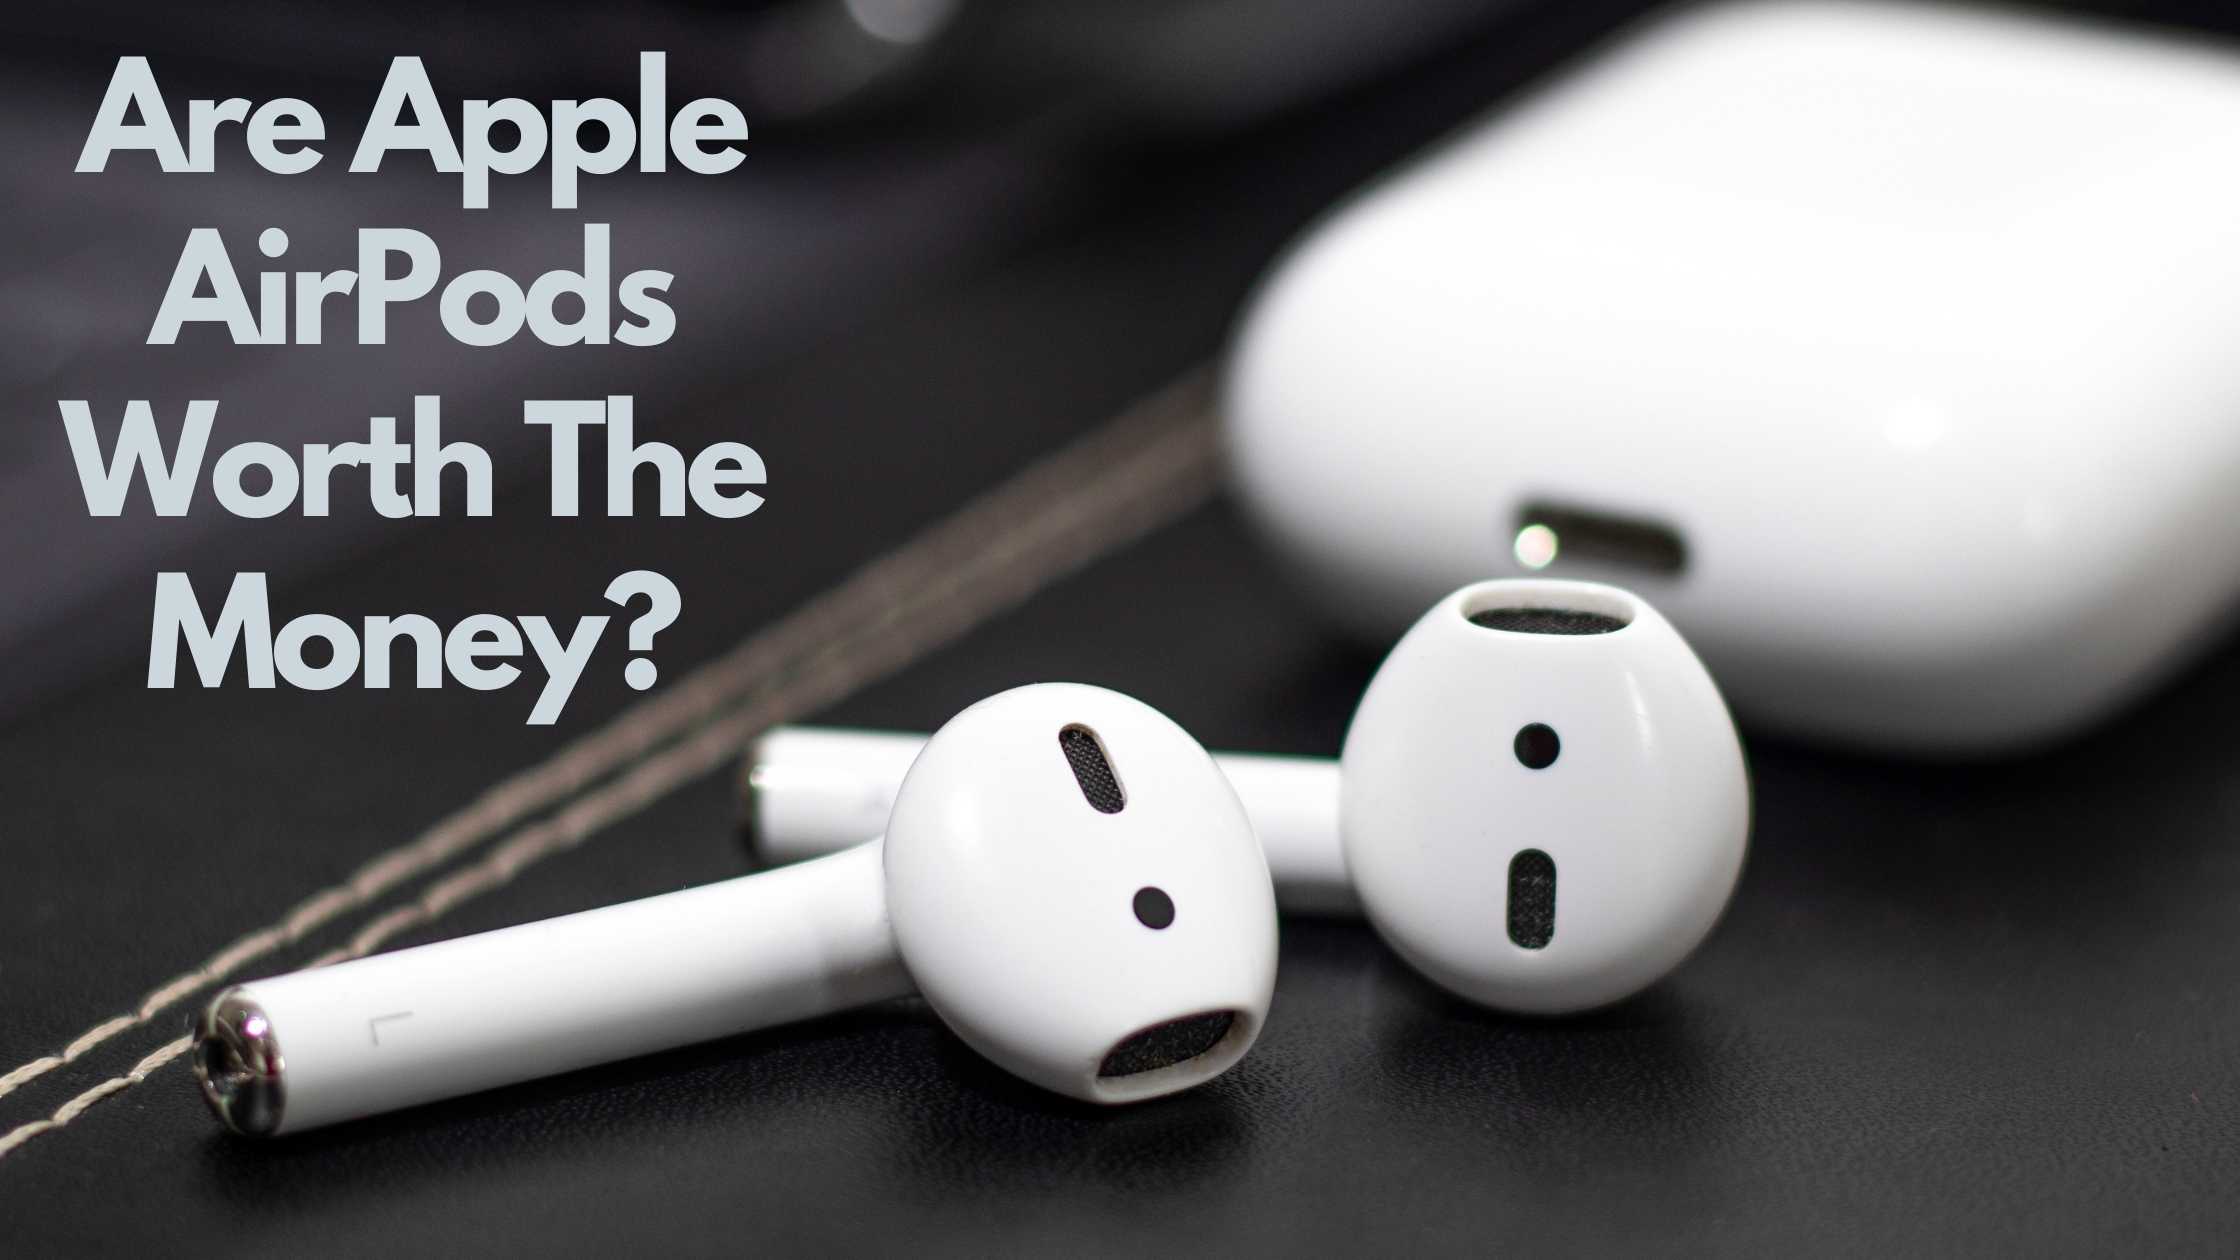 Are Apple AirPods Worth The Money?